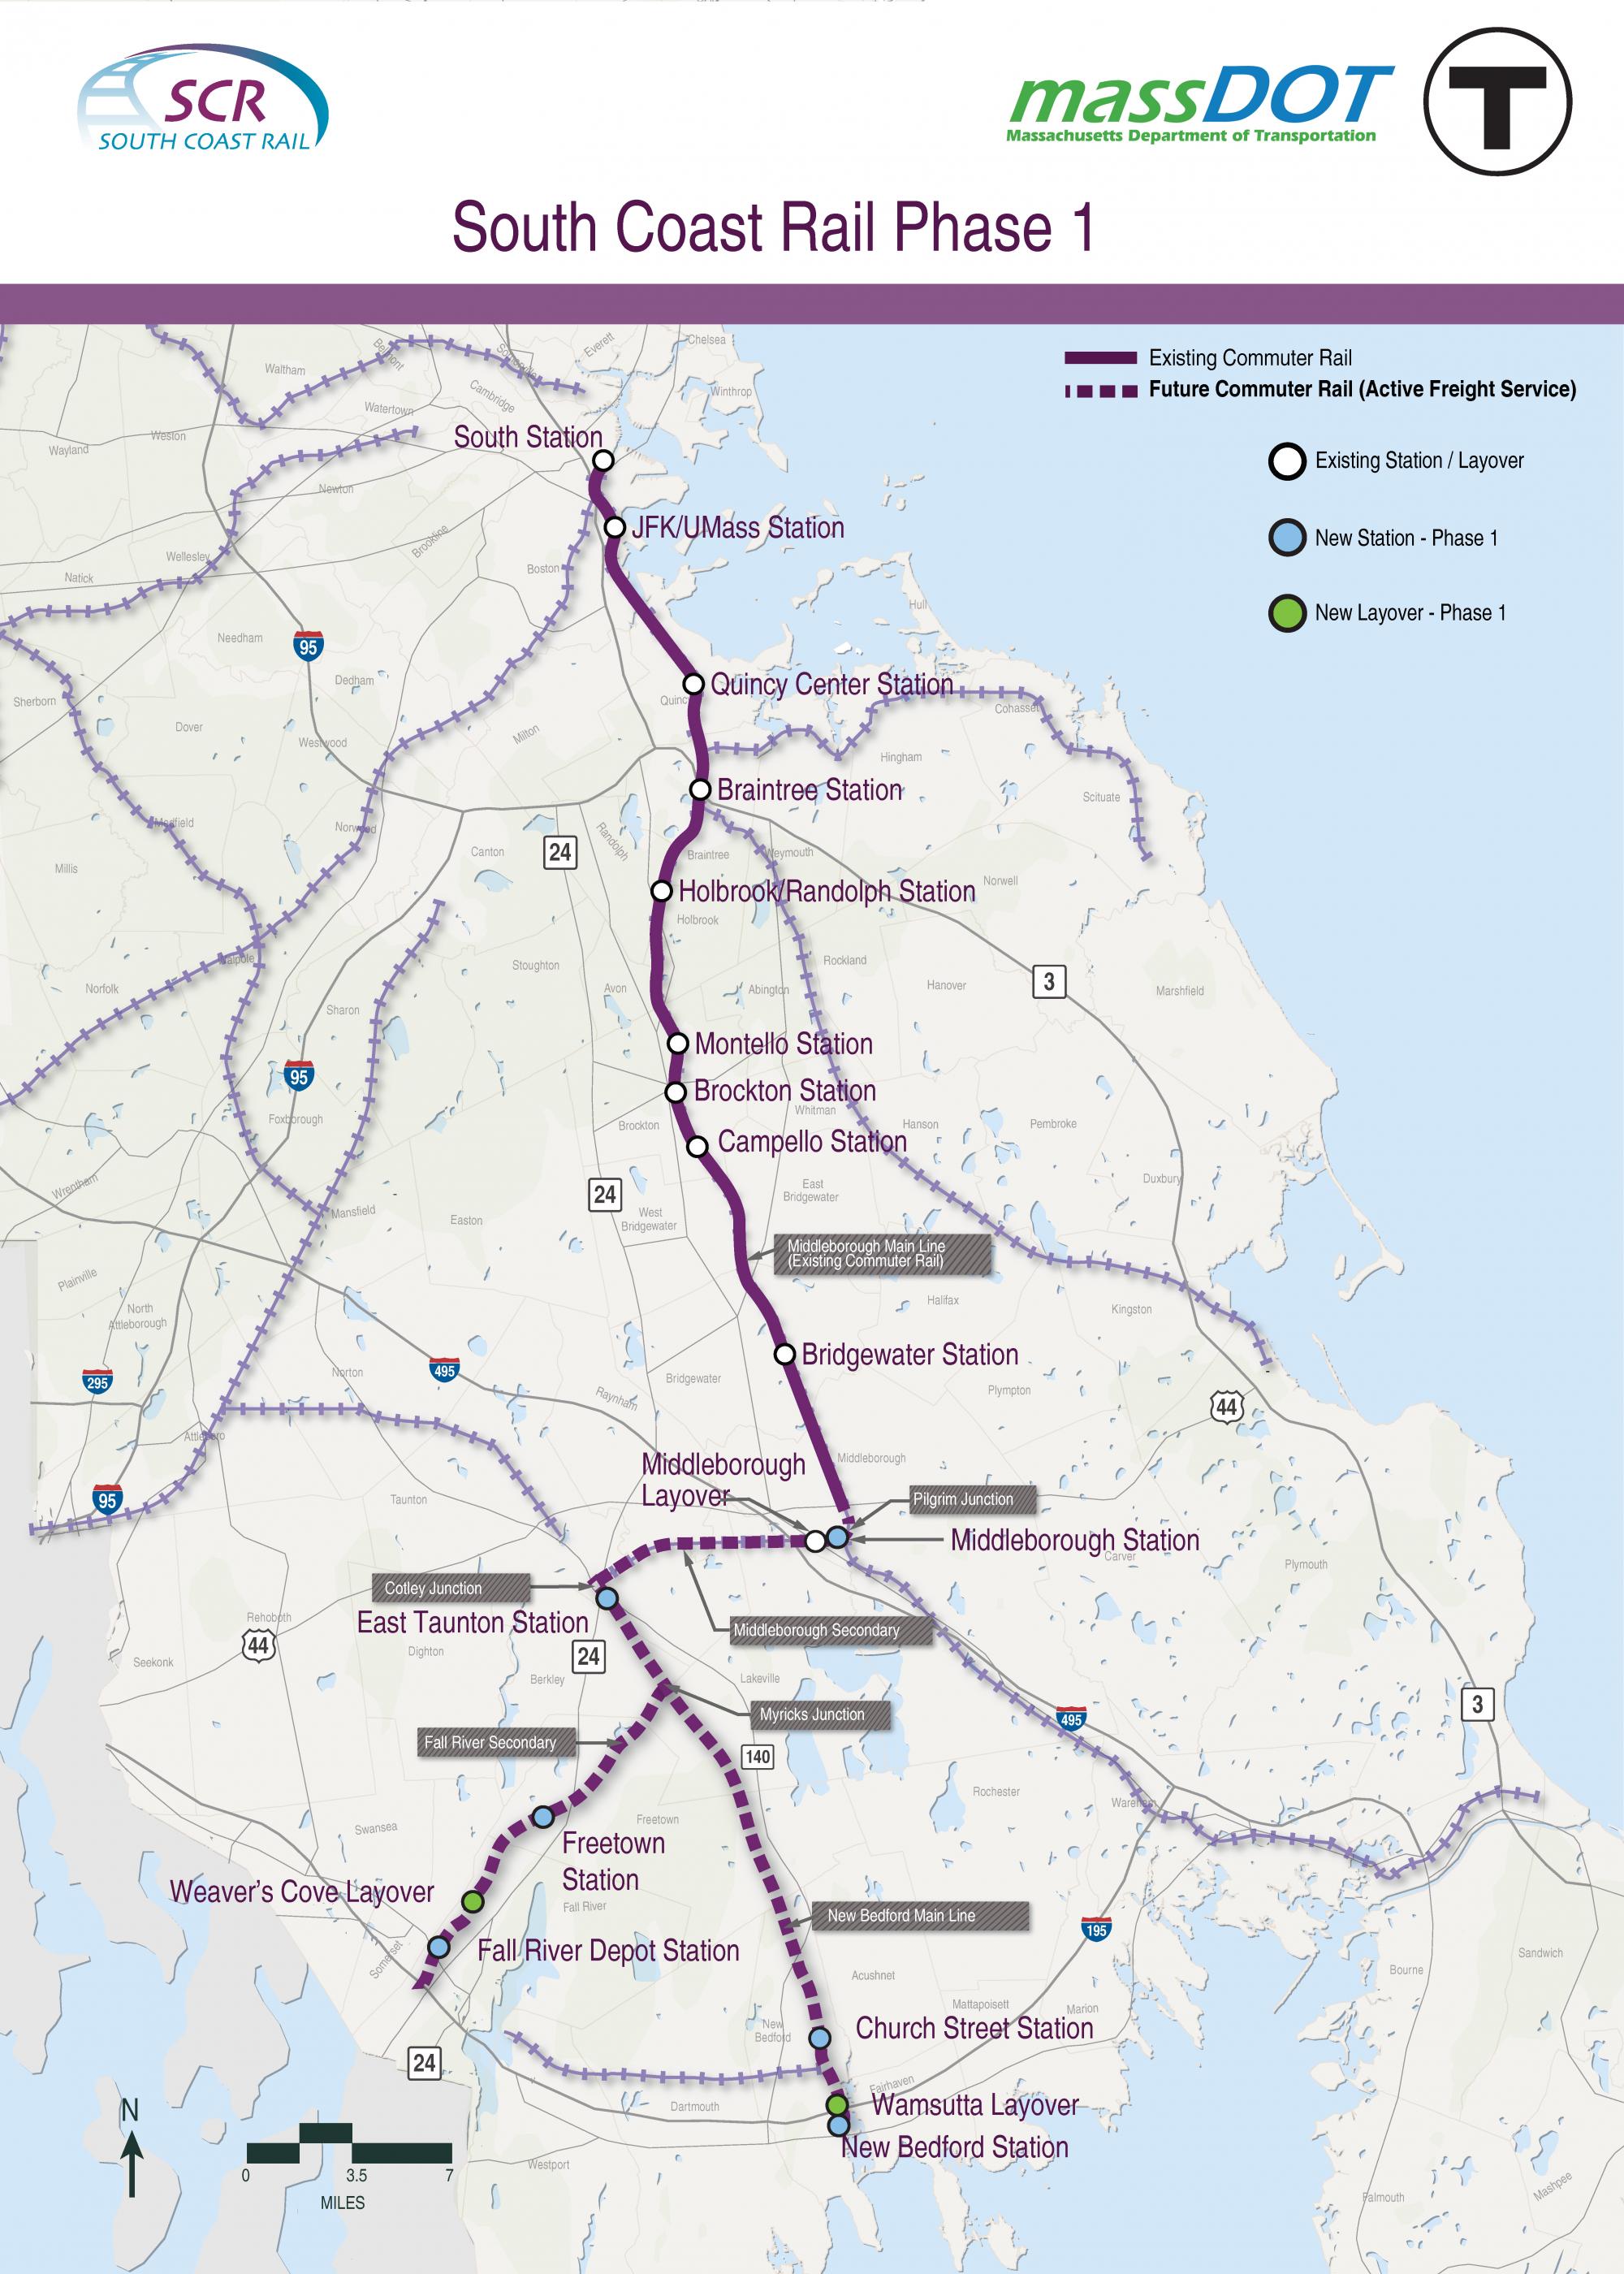 MBTA says South Coast Rail stations will be finished within weeks